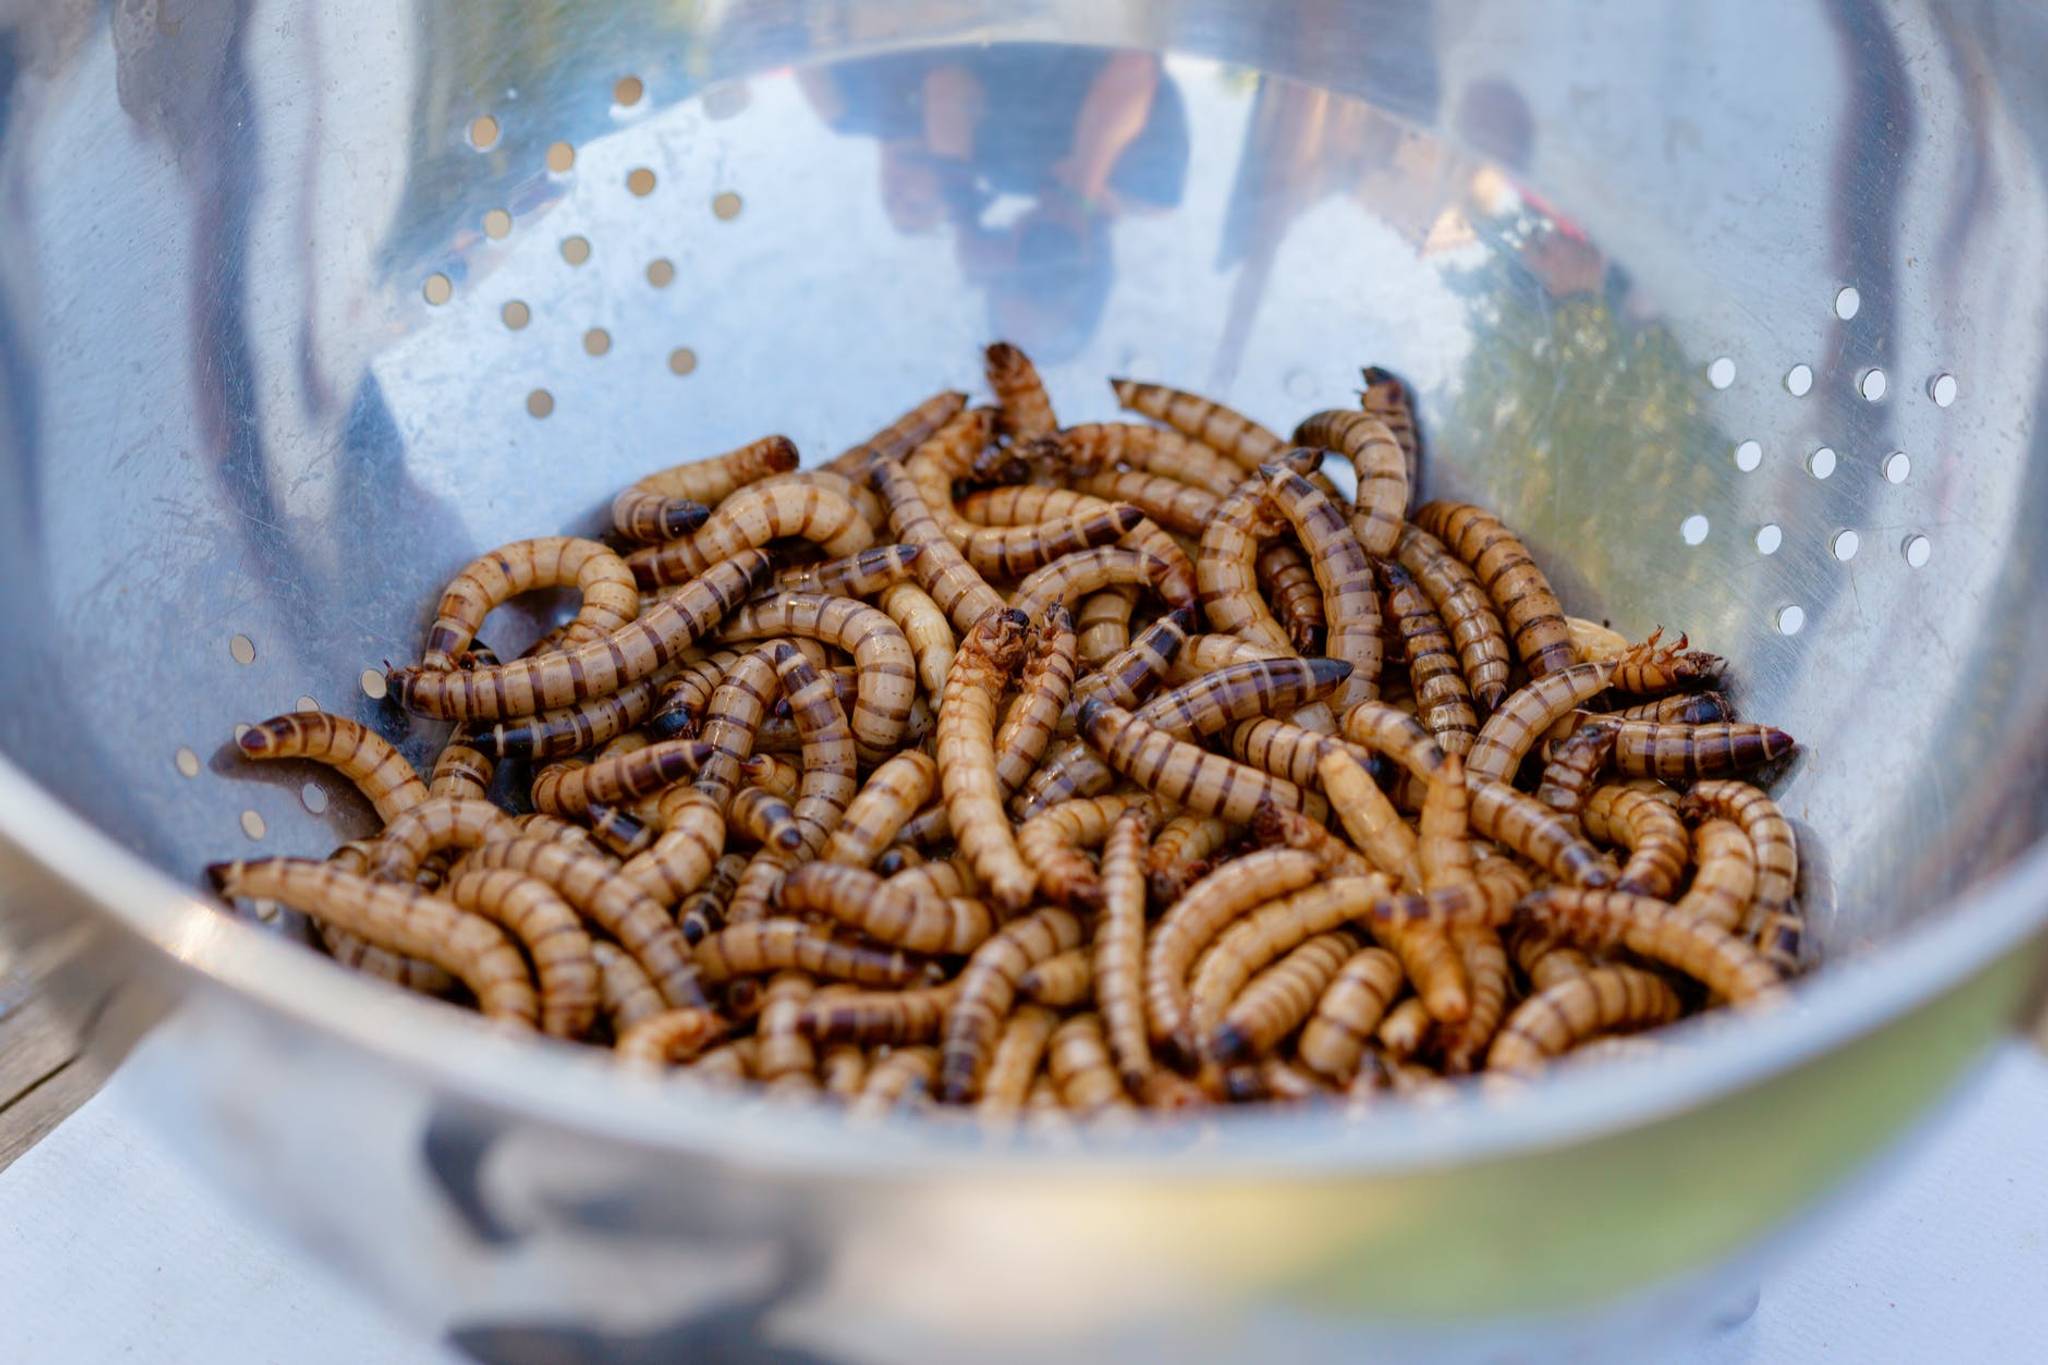 Insect feed taps shopper desire for eco innovation